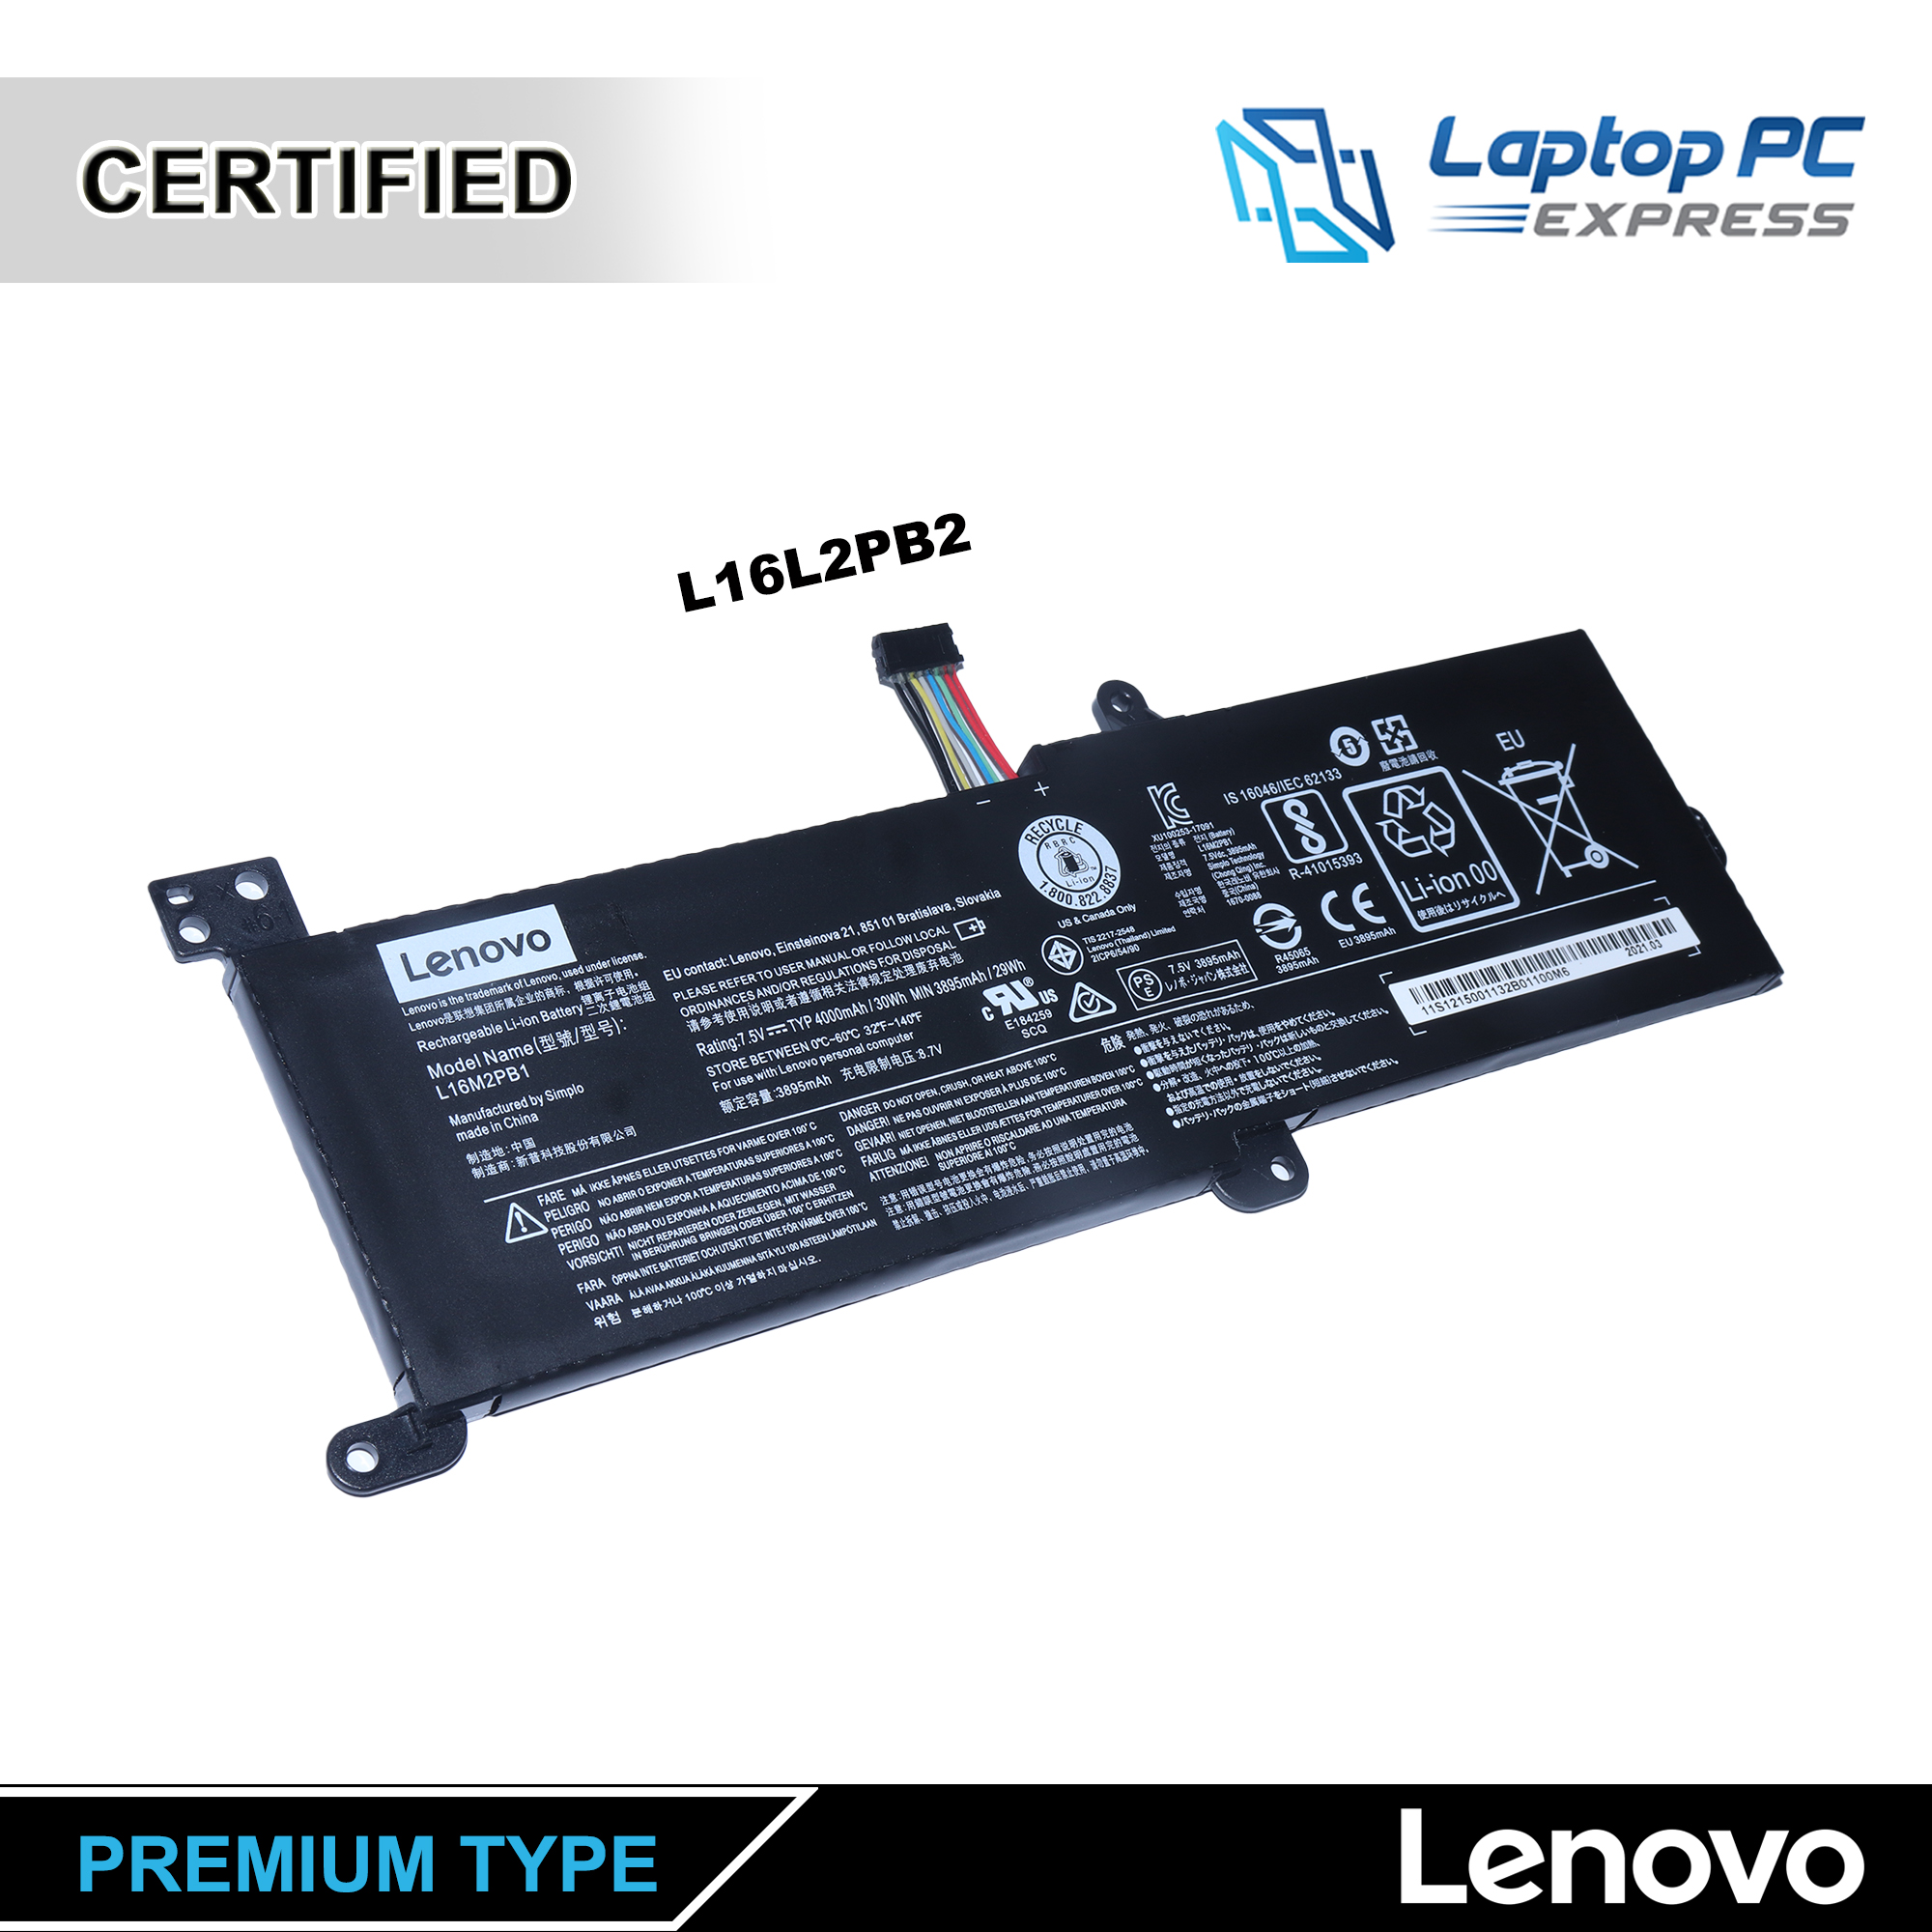 L16M2PB1, L17L2PF1, L16L2PB2 Lenovo Ideapad 3 15ADA05 Laptop Battery  Replacement | Lazada PH